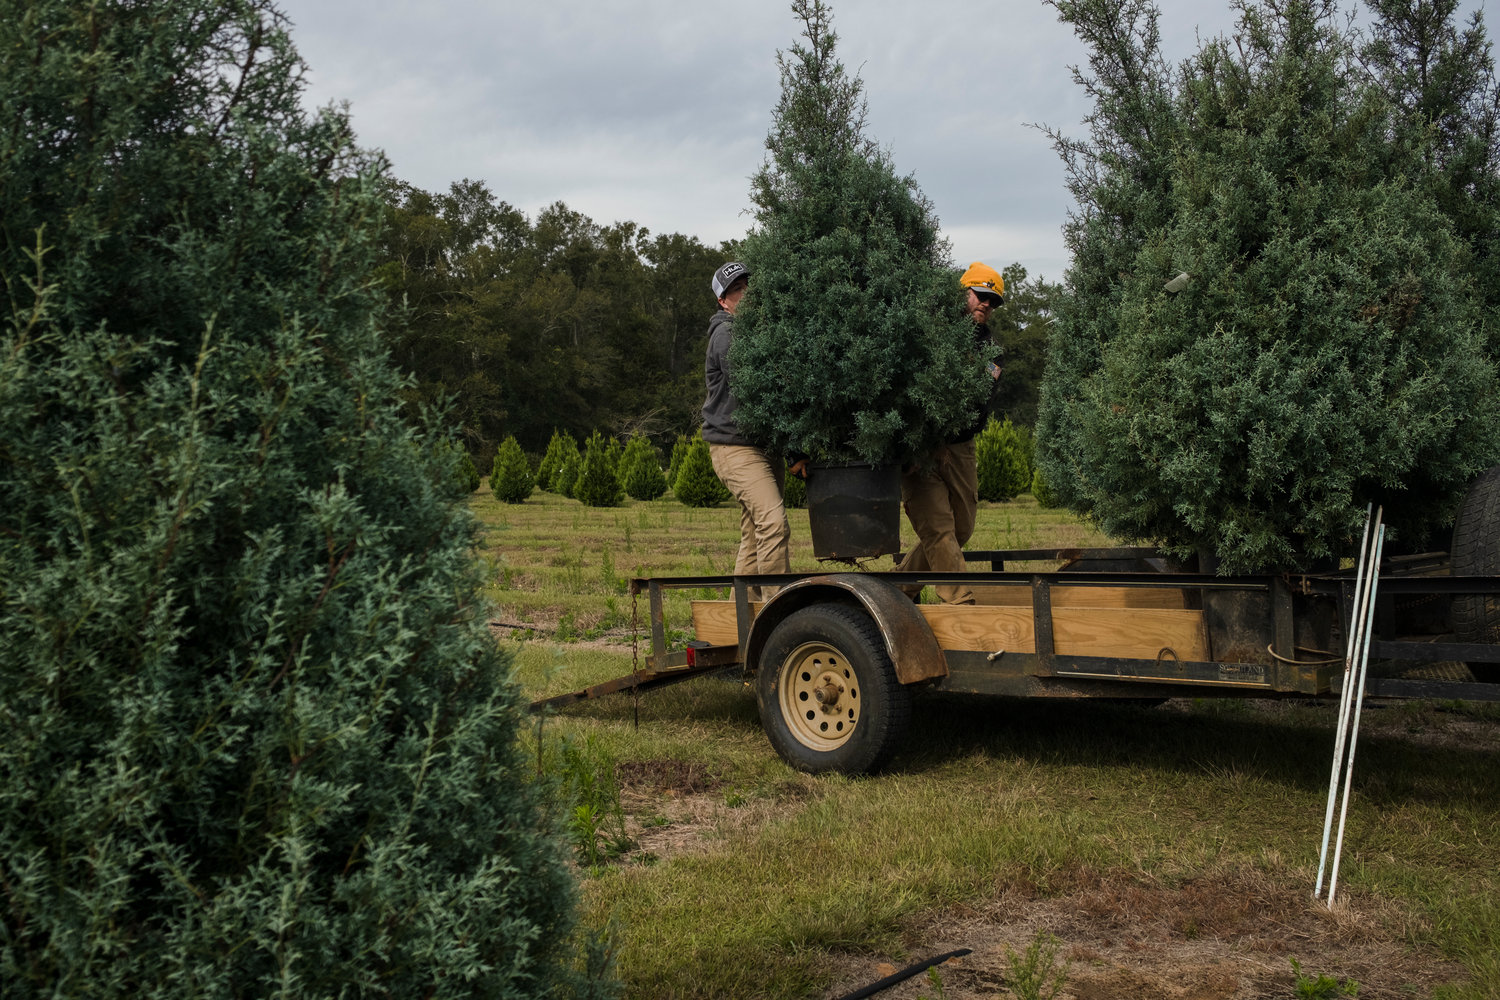 MICAH GREEN / GULF COAST MEDIA

Joshua Gregorius and Graham Wiggins load live Christmas trees into a customer’s trailer at Fish River Christmas Tree Farm on Wednesday.